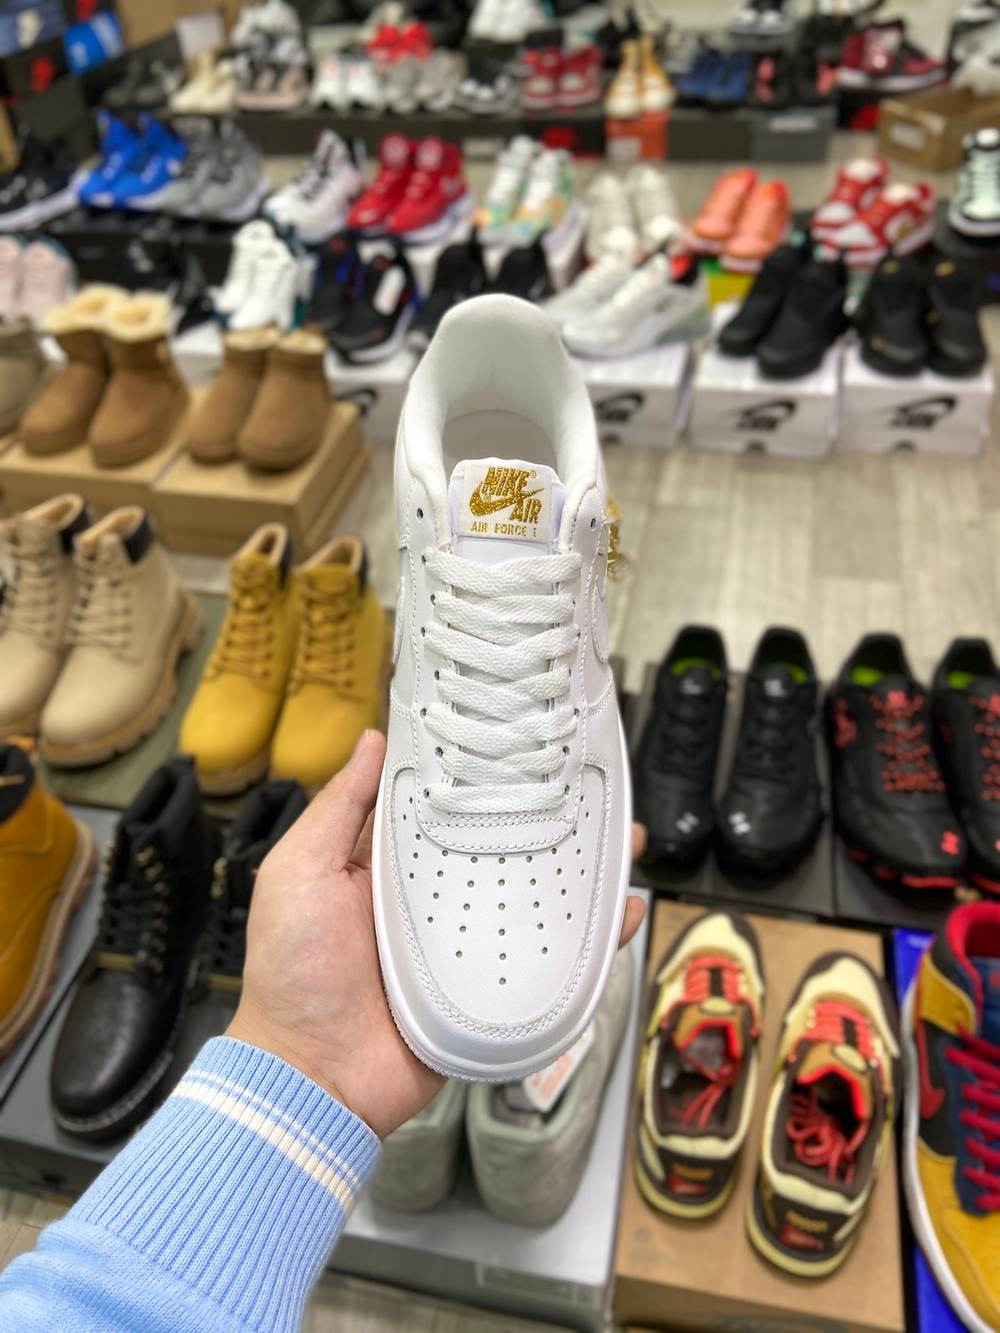 Nike Air Force 1 Low "LX White Pendant"